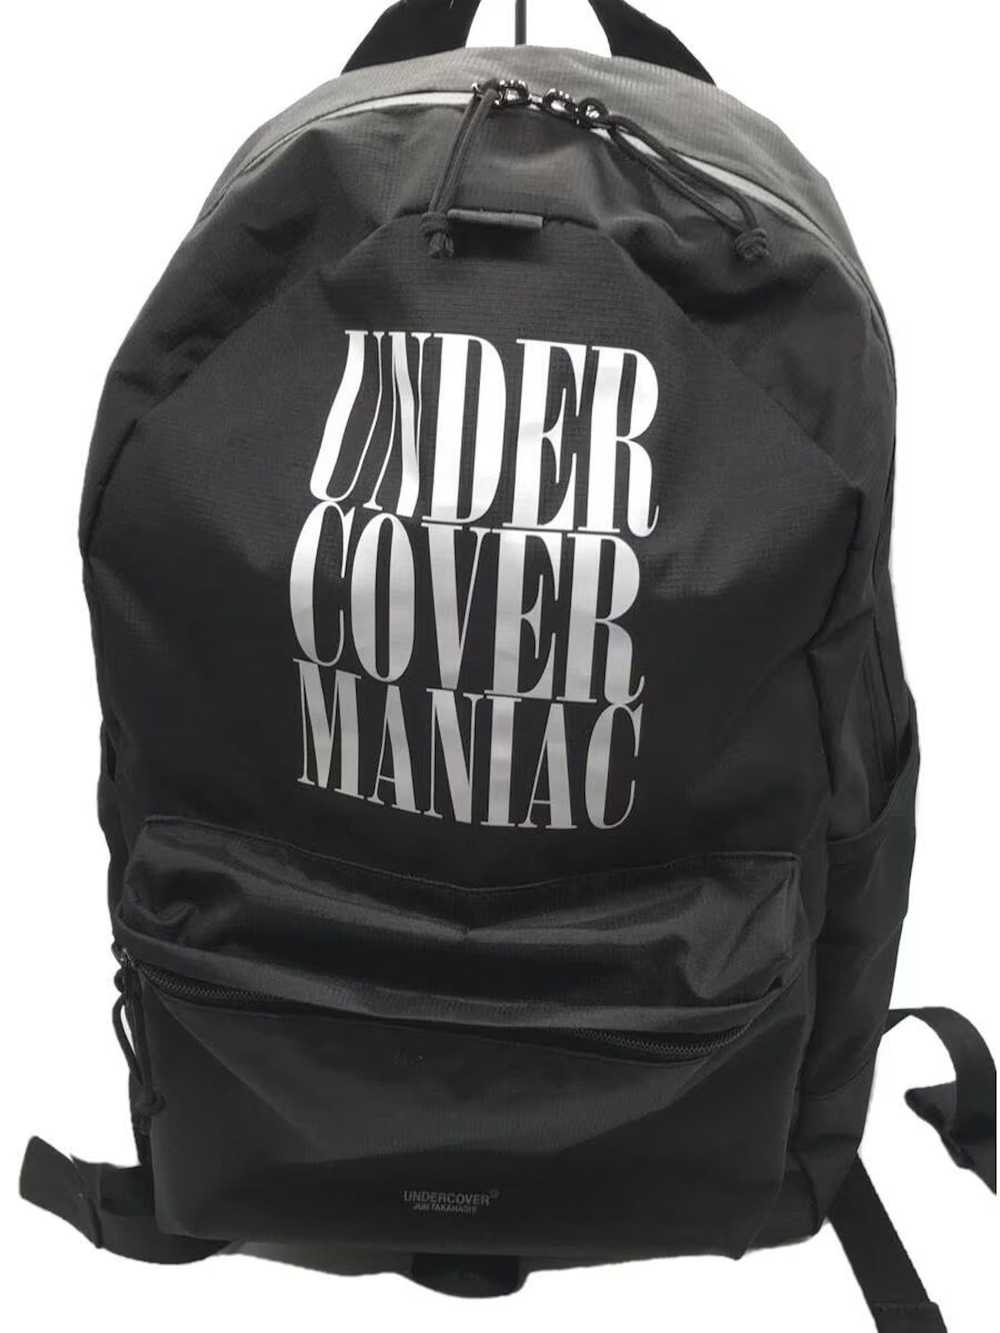 Undercover Undercover Maniac Nylon Backpack - image 1